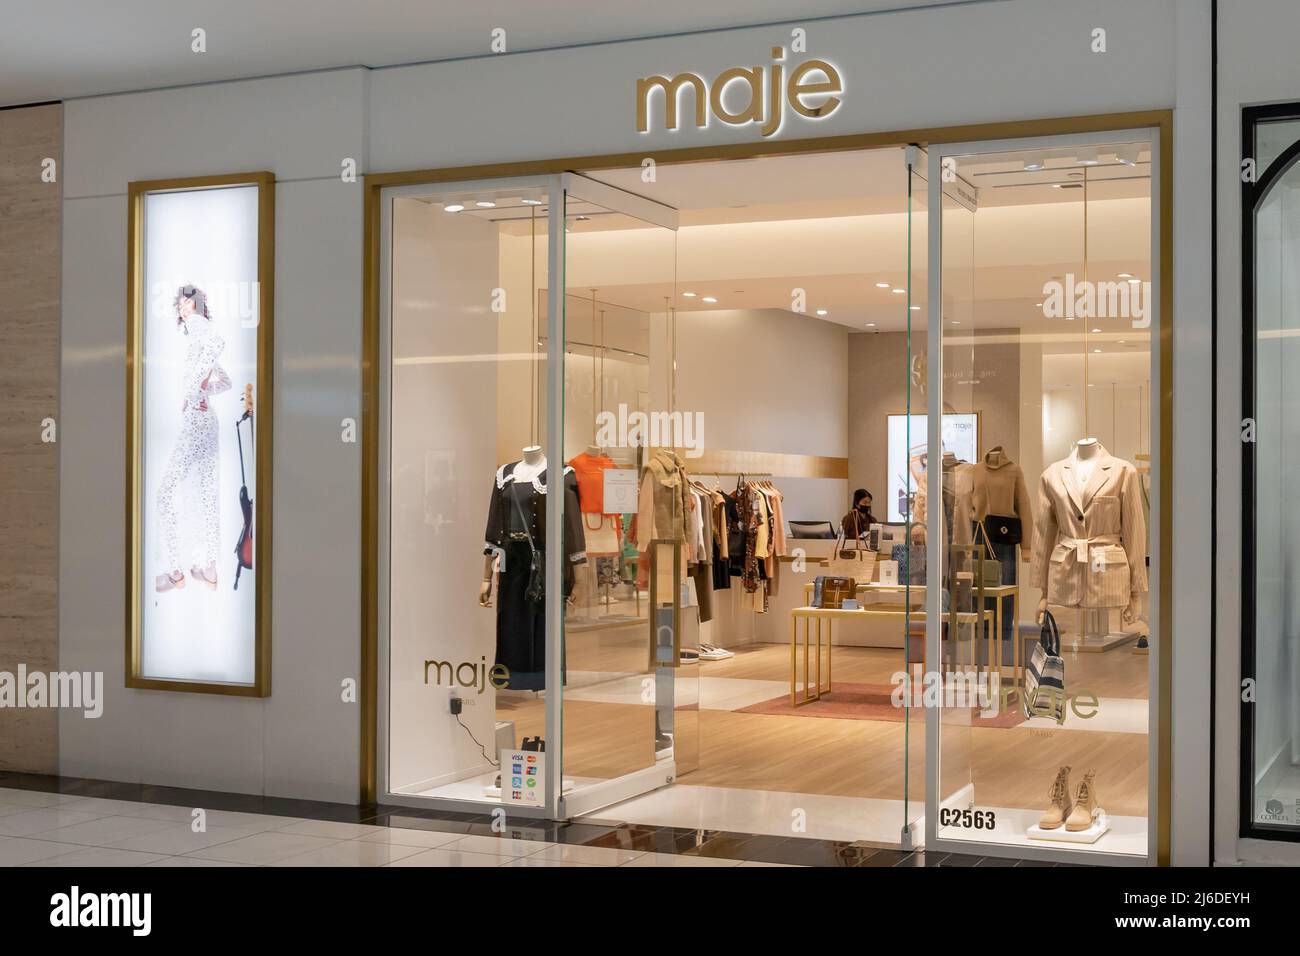 Houston, Texas, USA - February 25, 2022: Maje store in a shopping mall. Maje is a Paris-based clothing brand. Stock Photo